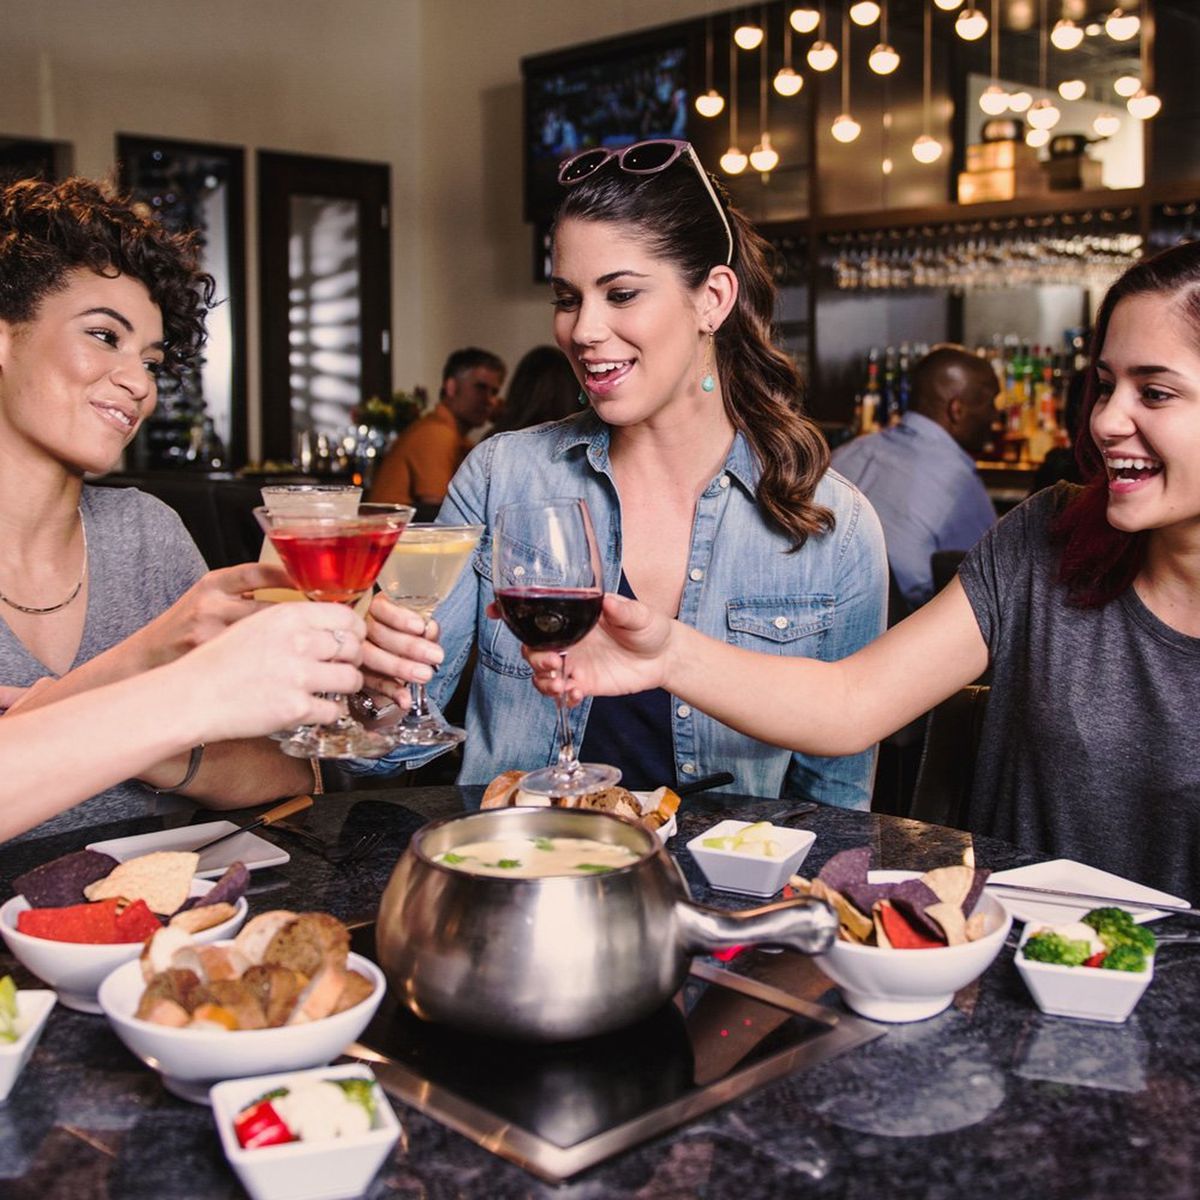 Melting Pot, part of Orlando's Magical Dining Month